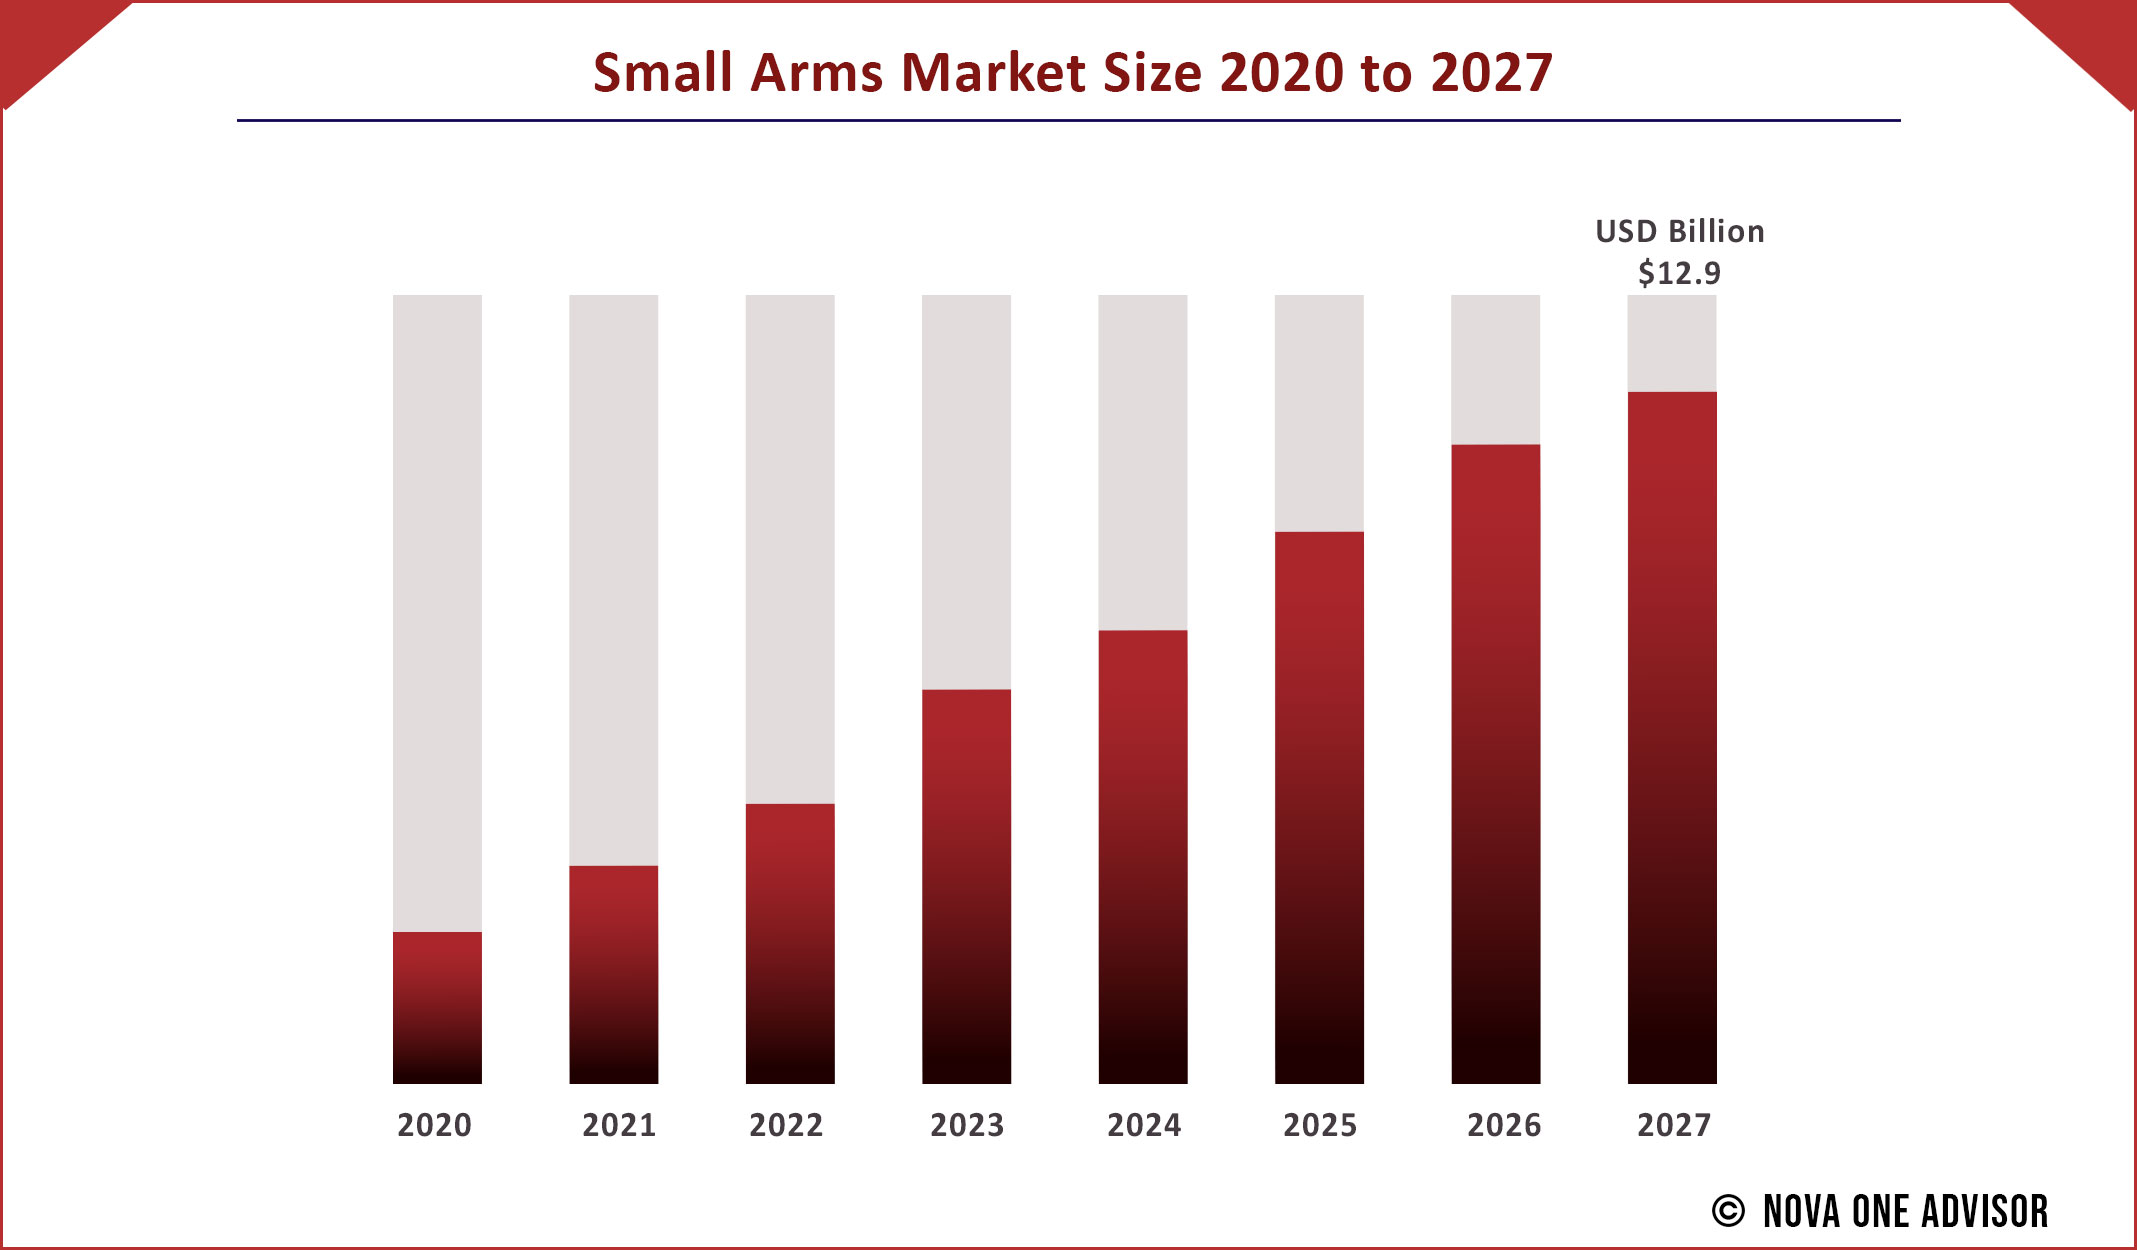 Small Arms Market Size 2020 to 2027